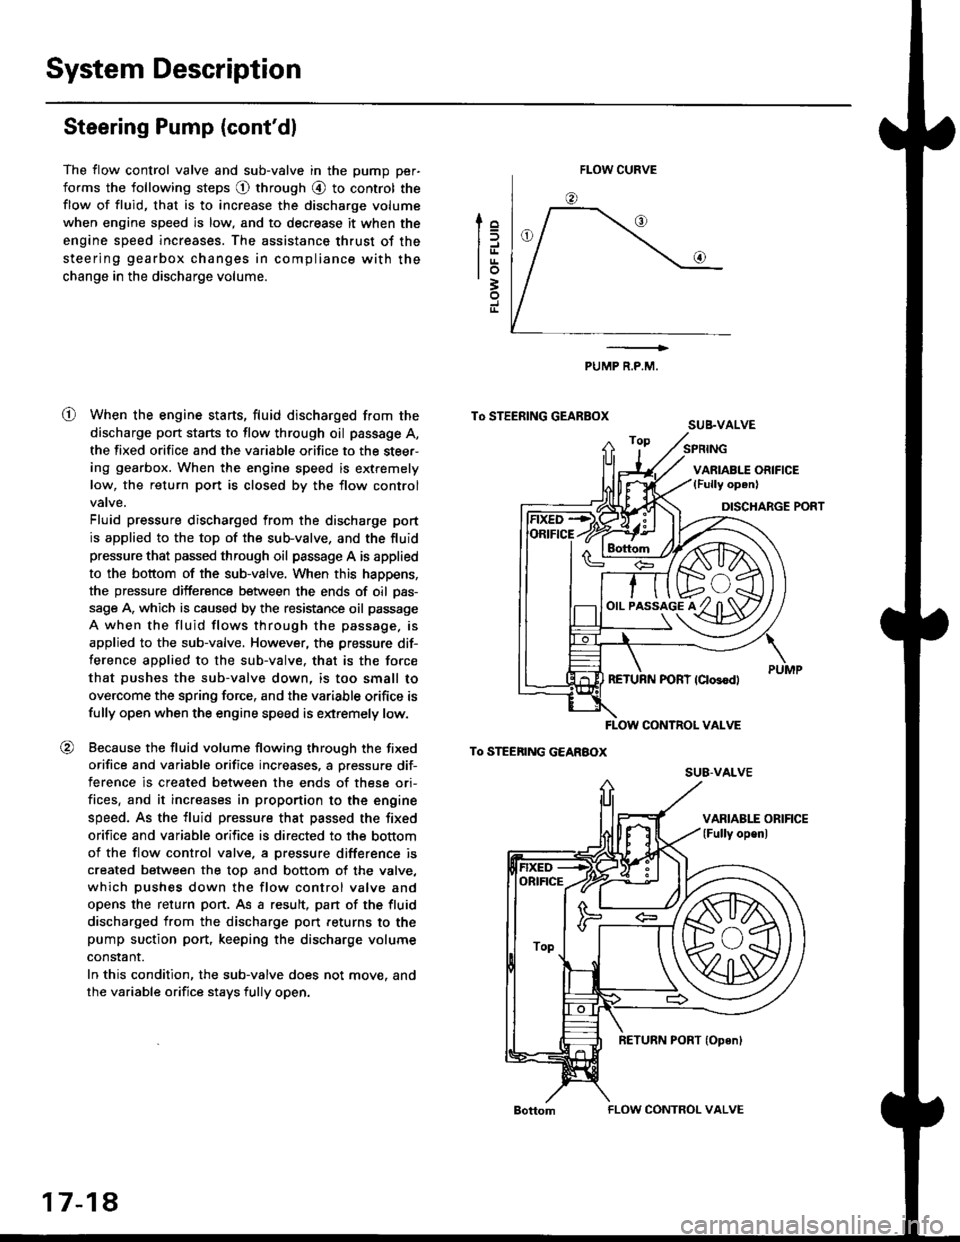 HONDA CIVIC 1996 6.G User Guide System Description
Steering Pump (contdl
The flow control valve and sub-valve in the pump per-
forms the following steps @ through @ to control the
flow of fluid, that is to increase the discharge vo